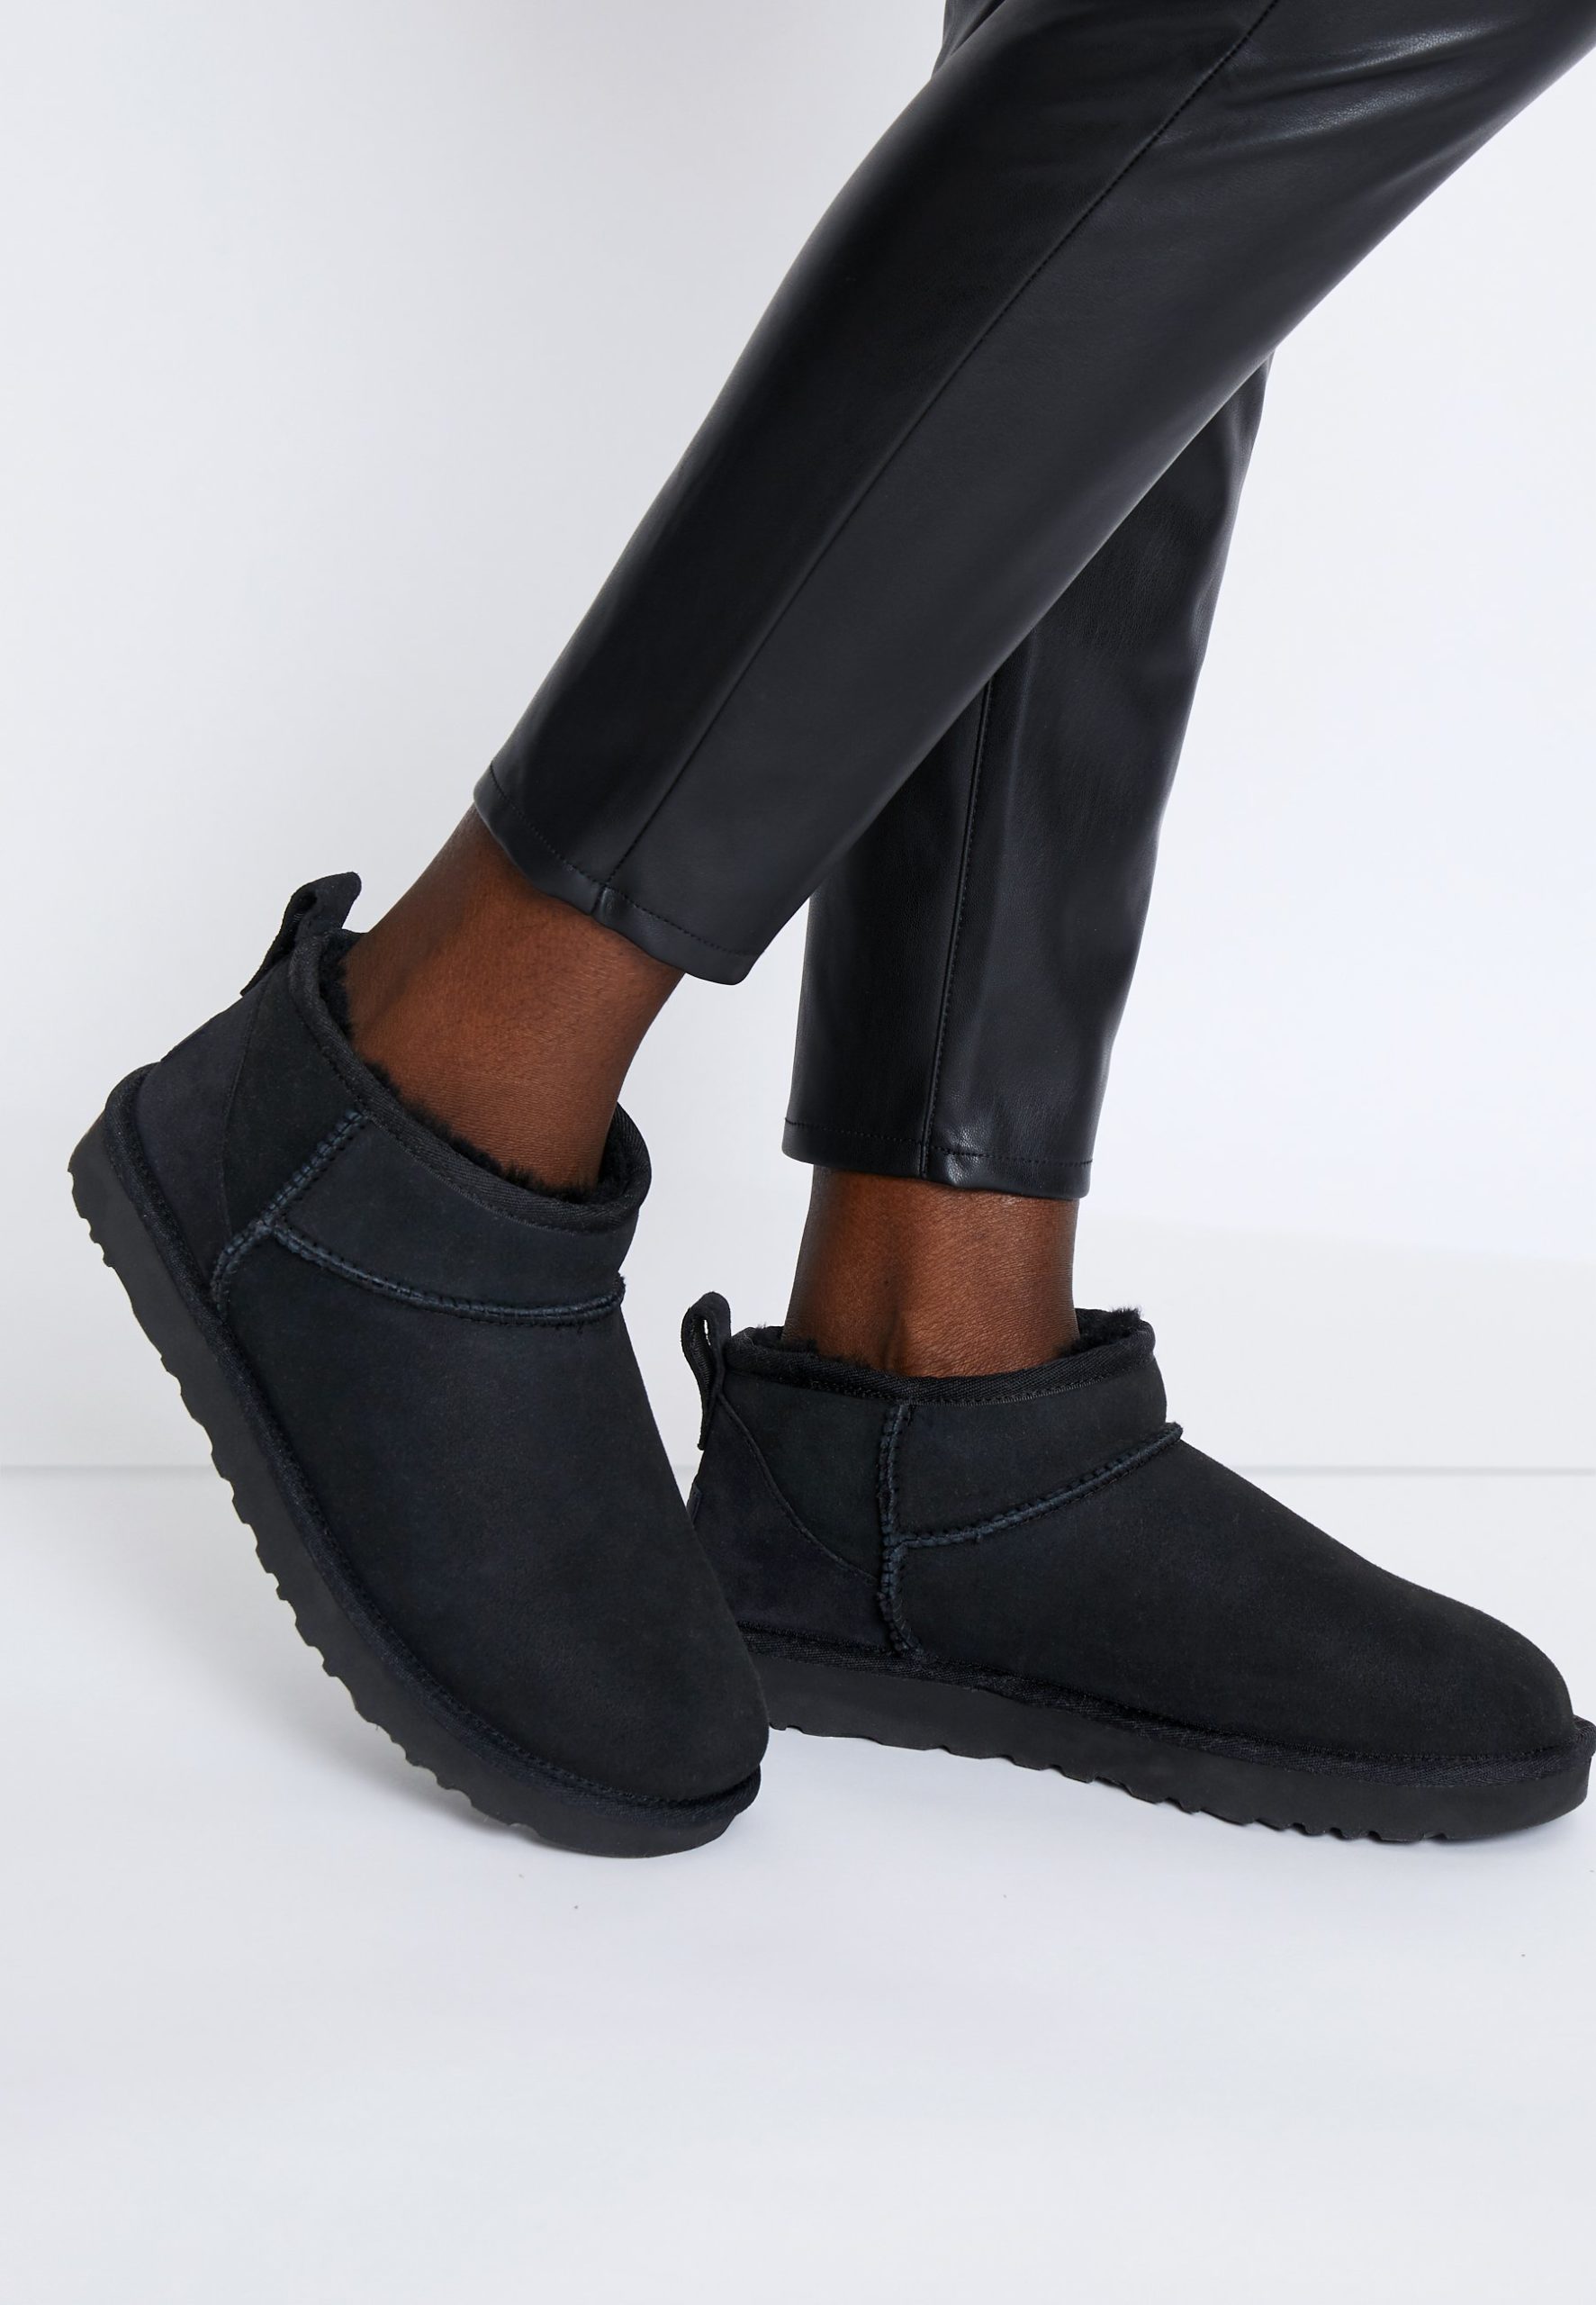 Ugg Mini: Ugg Ultra Mini boots are back on trend winter 2022